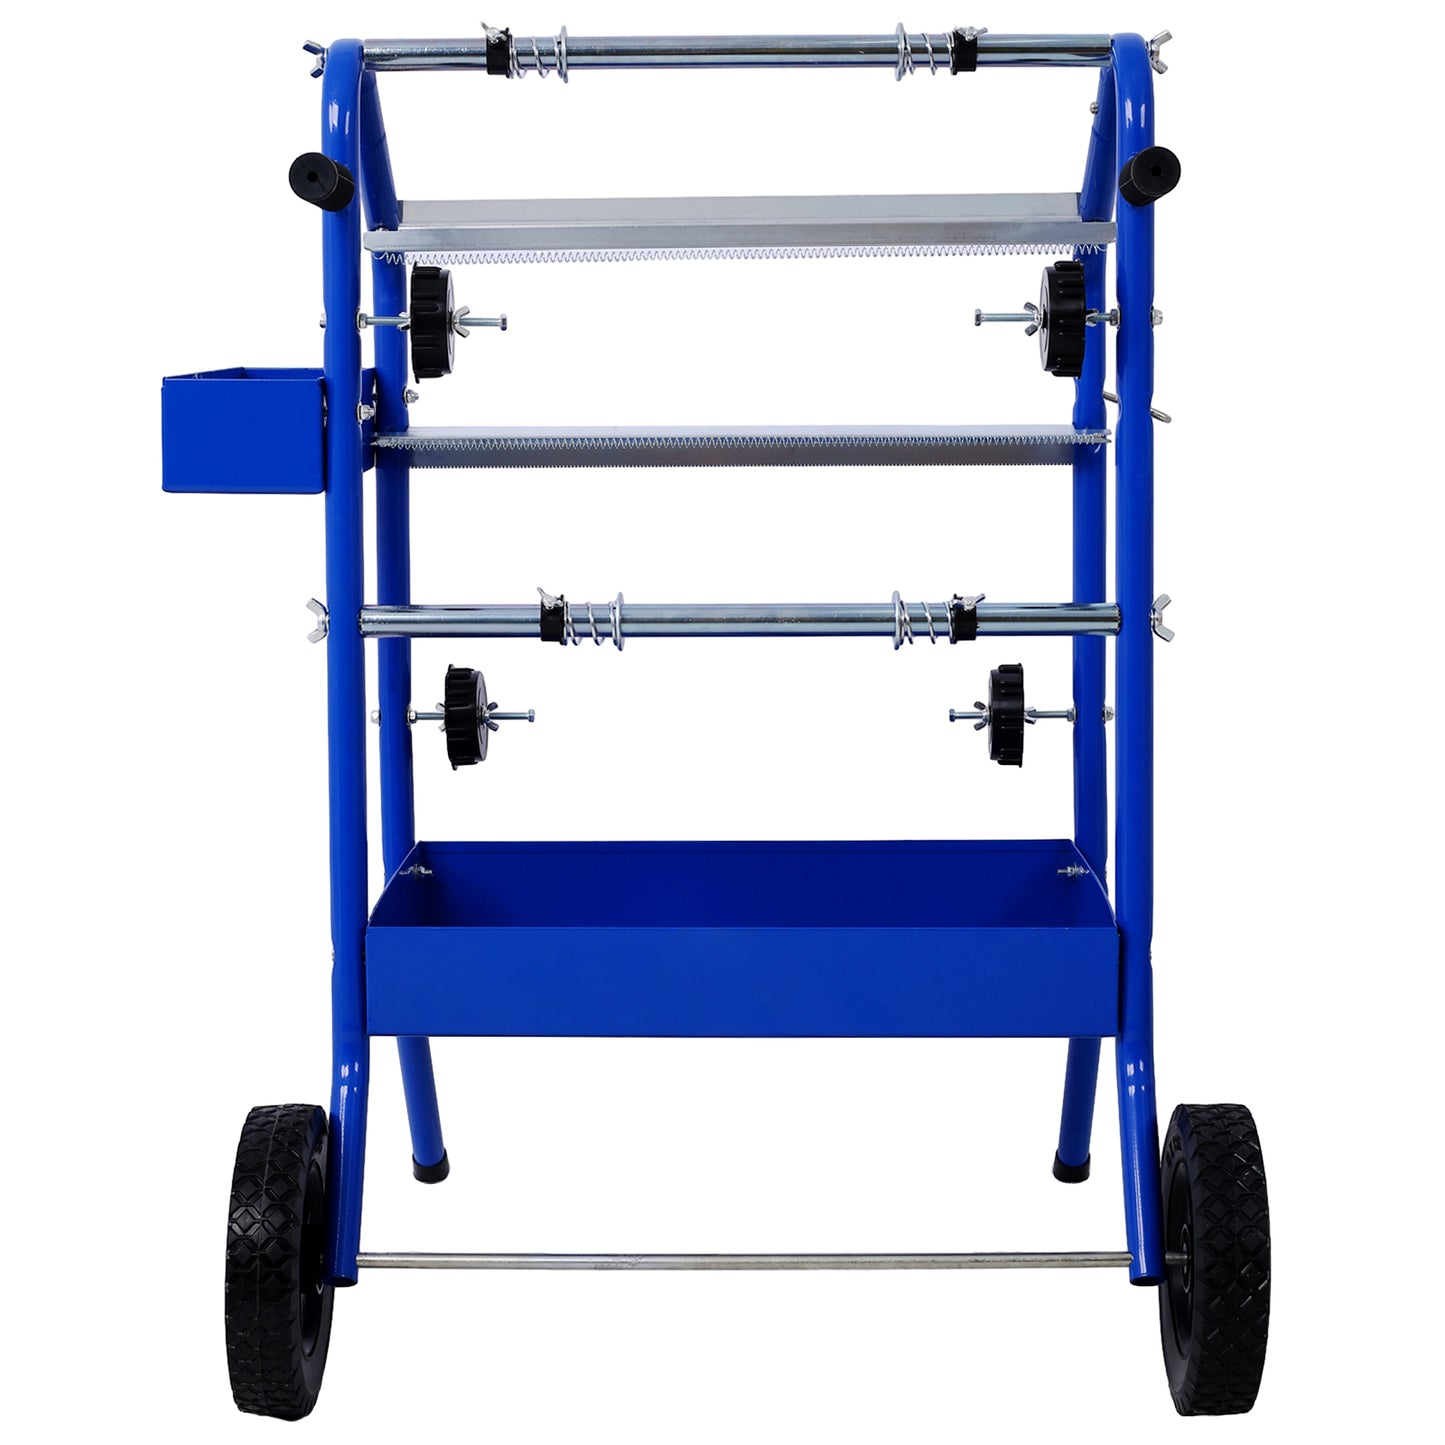 Mobile 18" Multi-Roll Masking Paper Machine with Storage Trays,BLUE